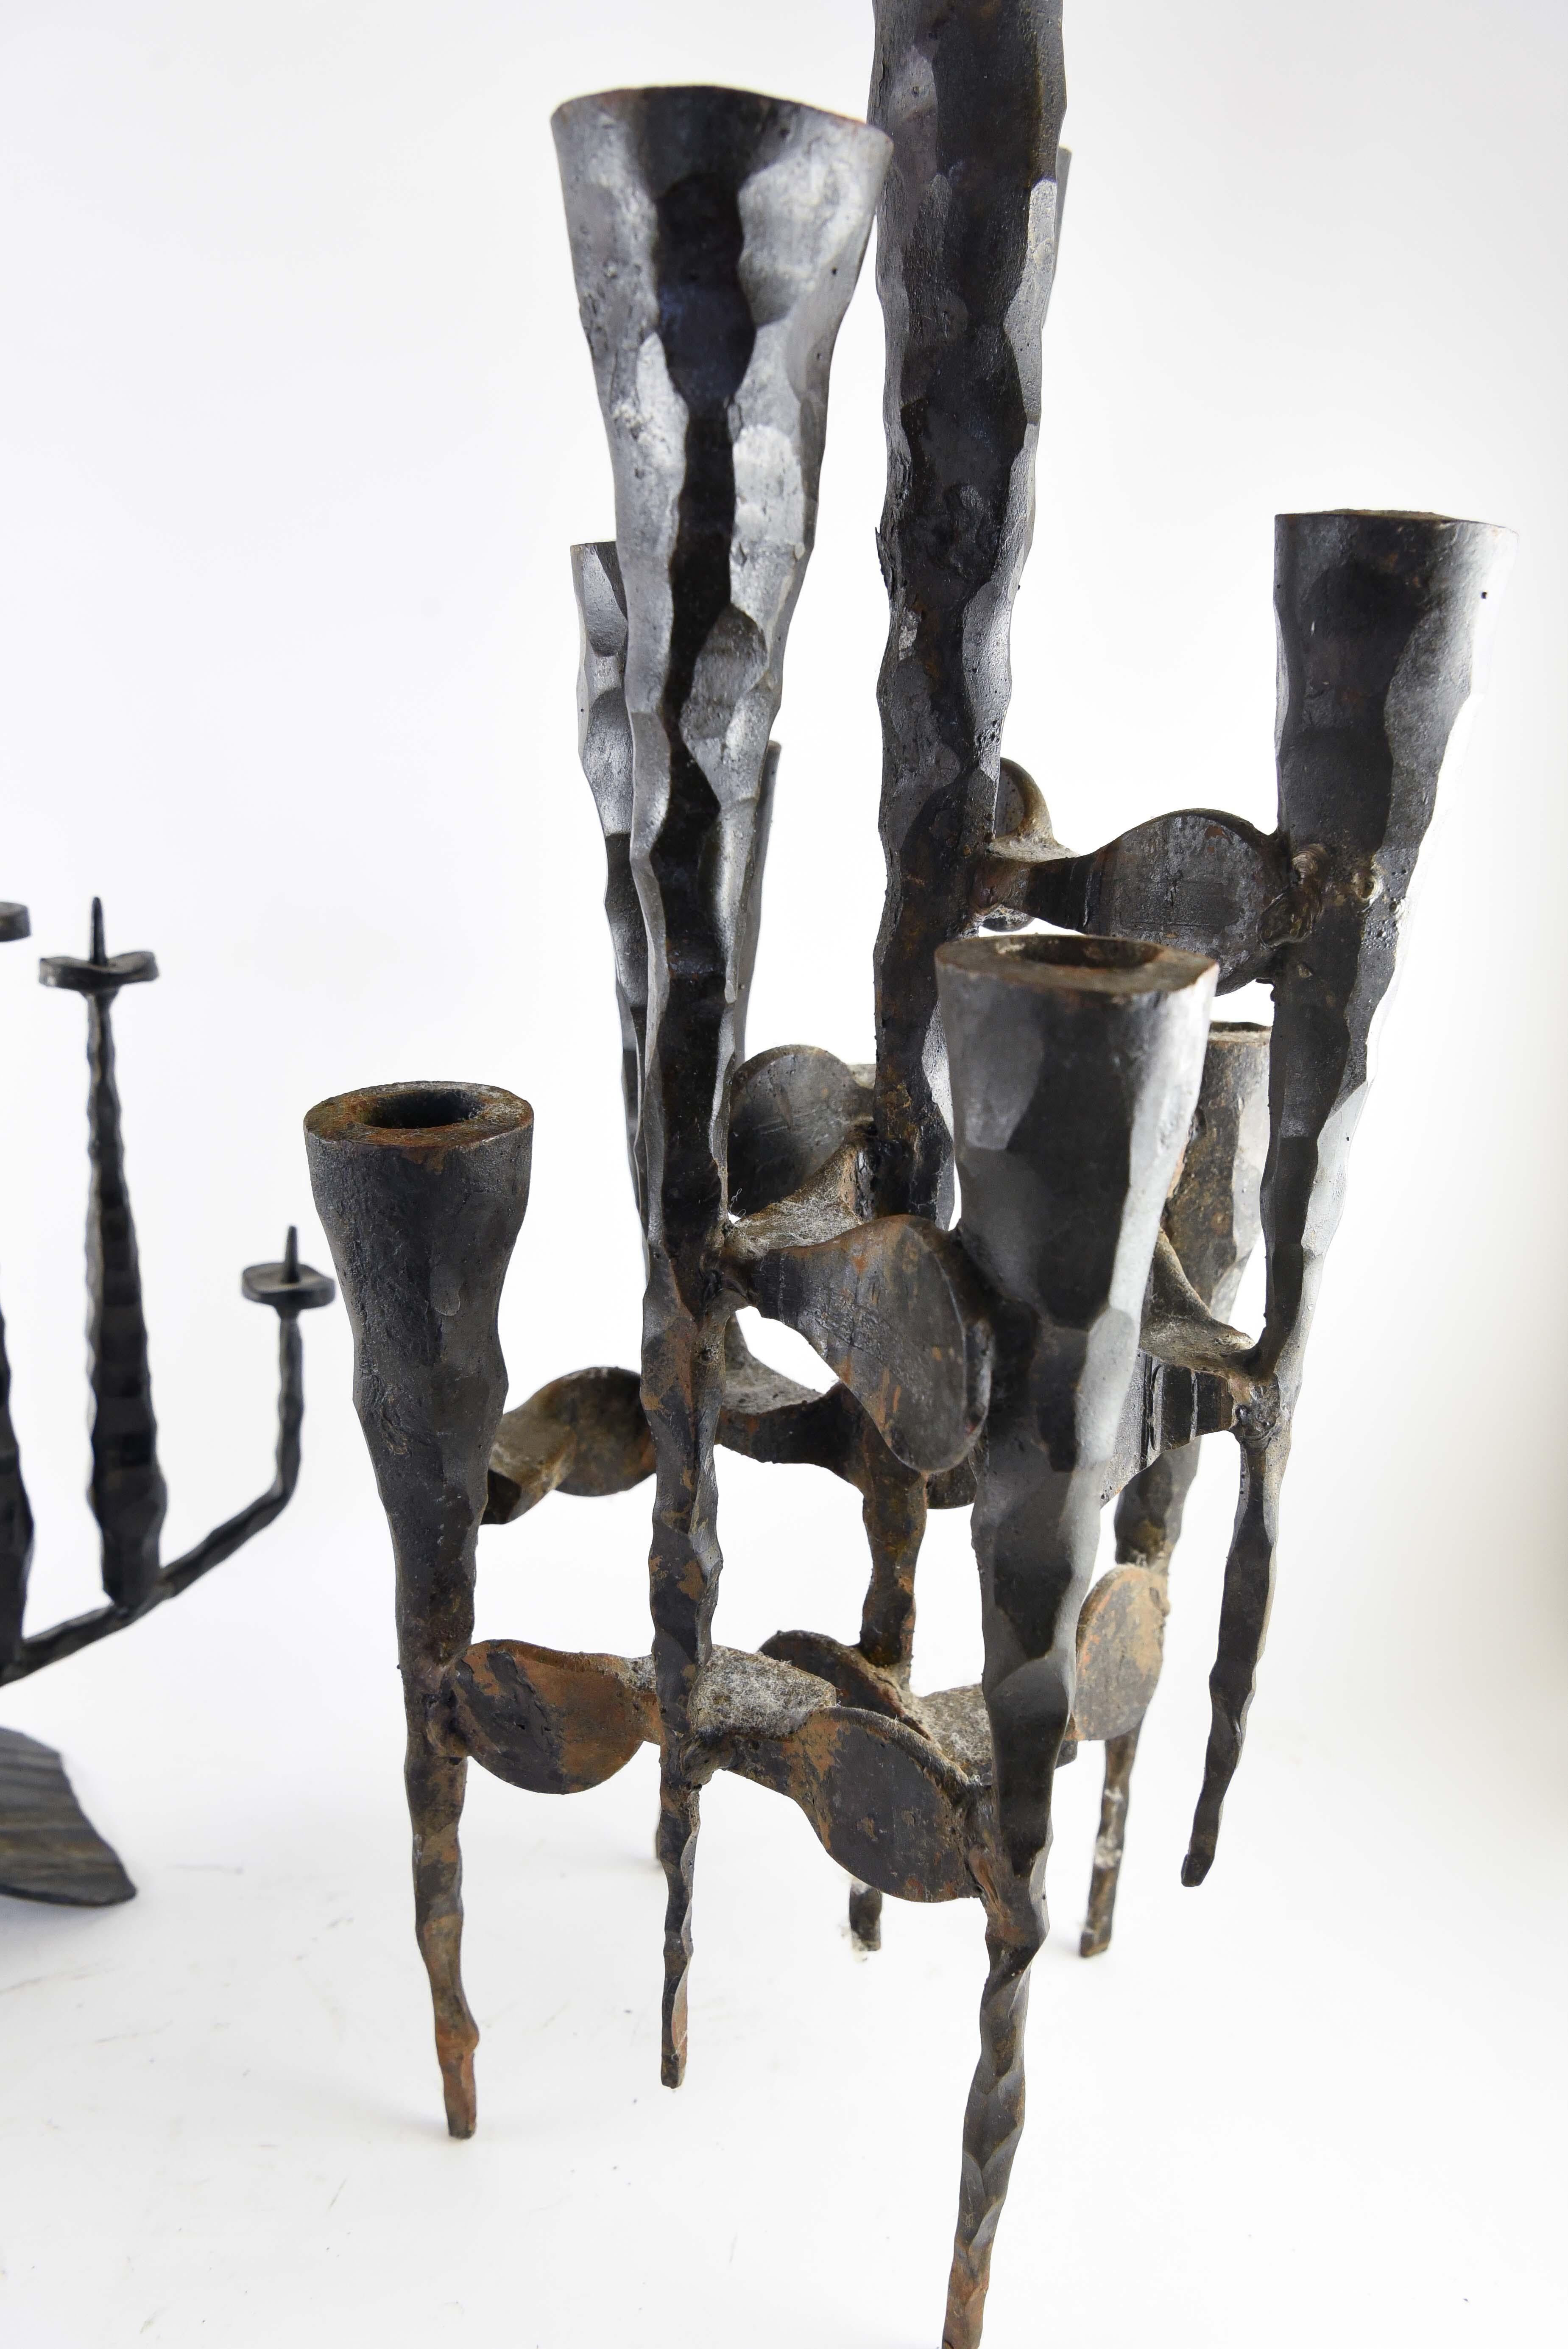 A wonderful brutalist sculpture by Israeli artist David Palumbo, this Menorah will definitely start conversations, a great abstract artistic rendition of the traditional chanukah lamp.